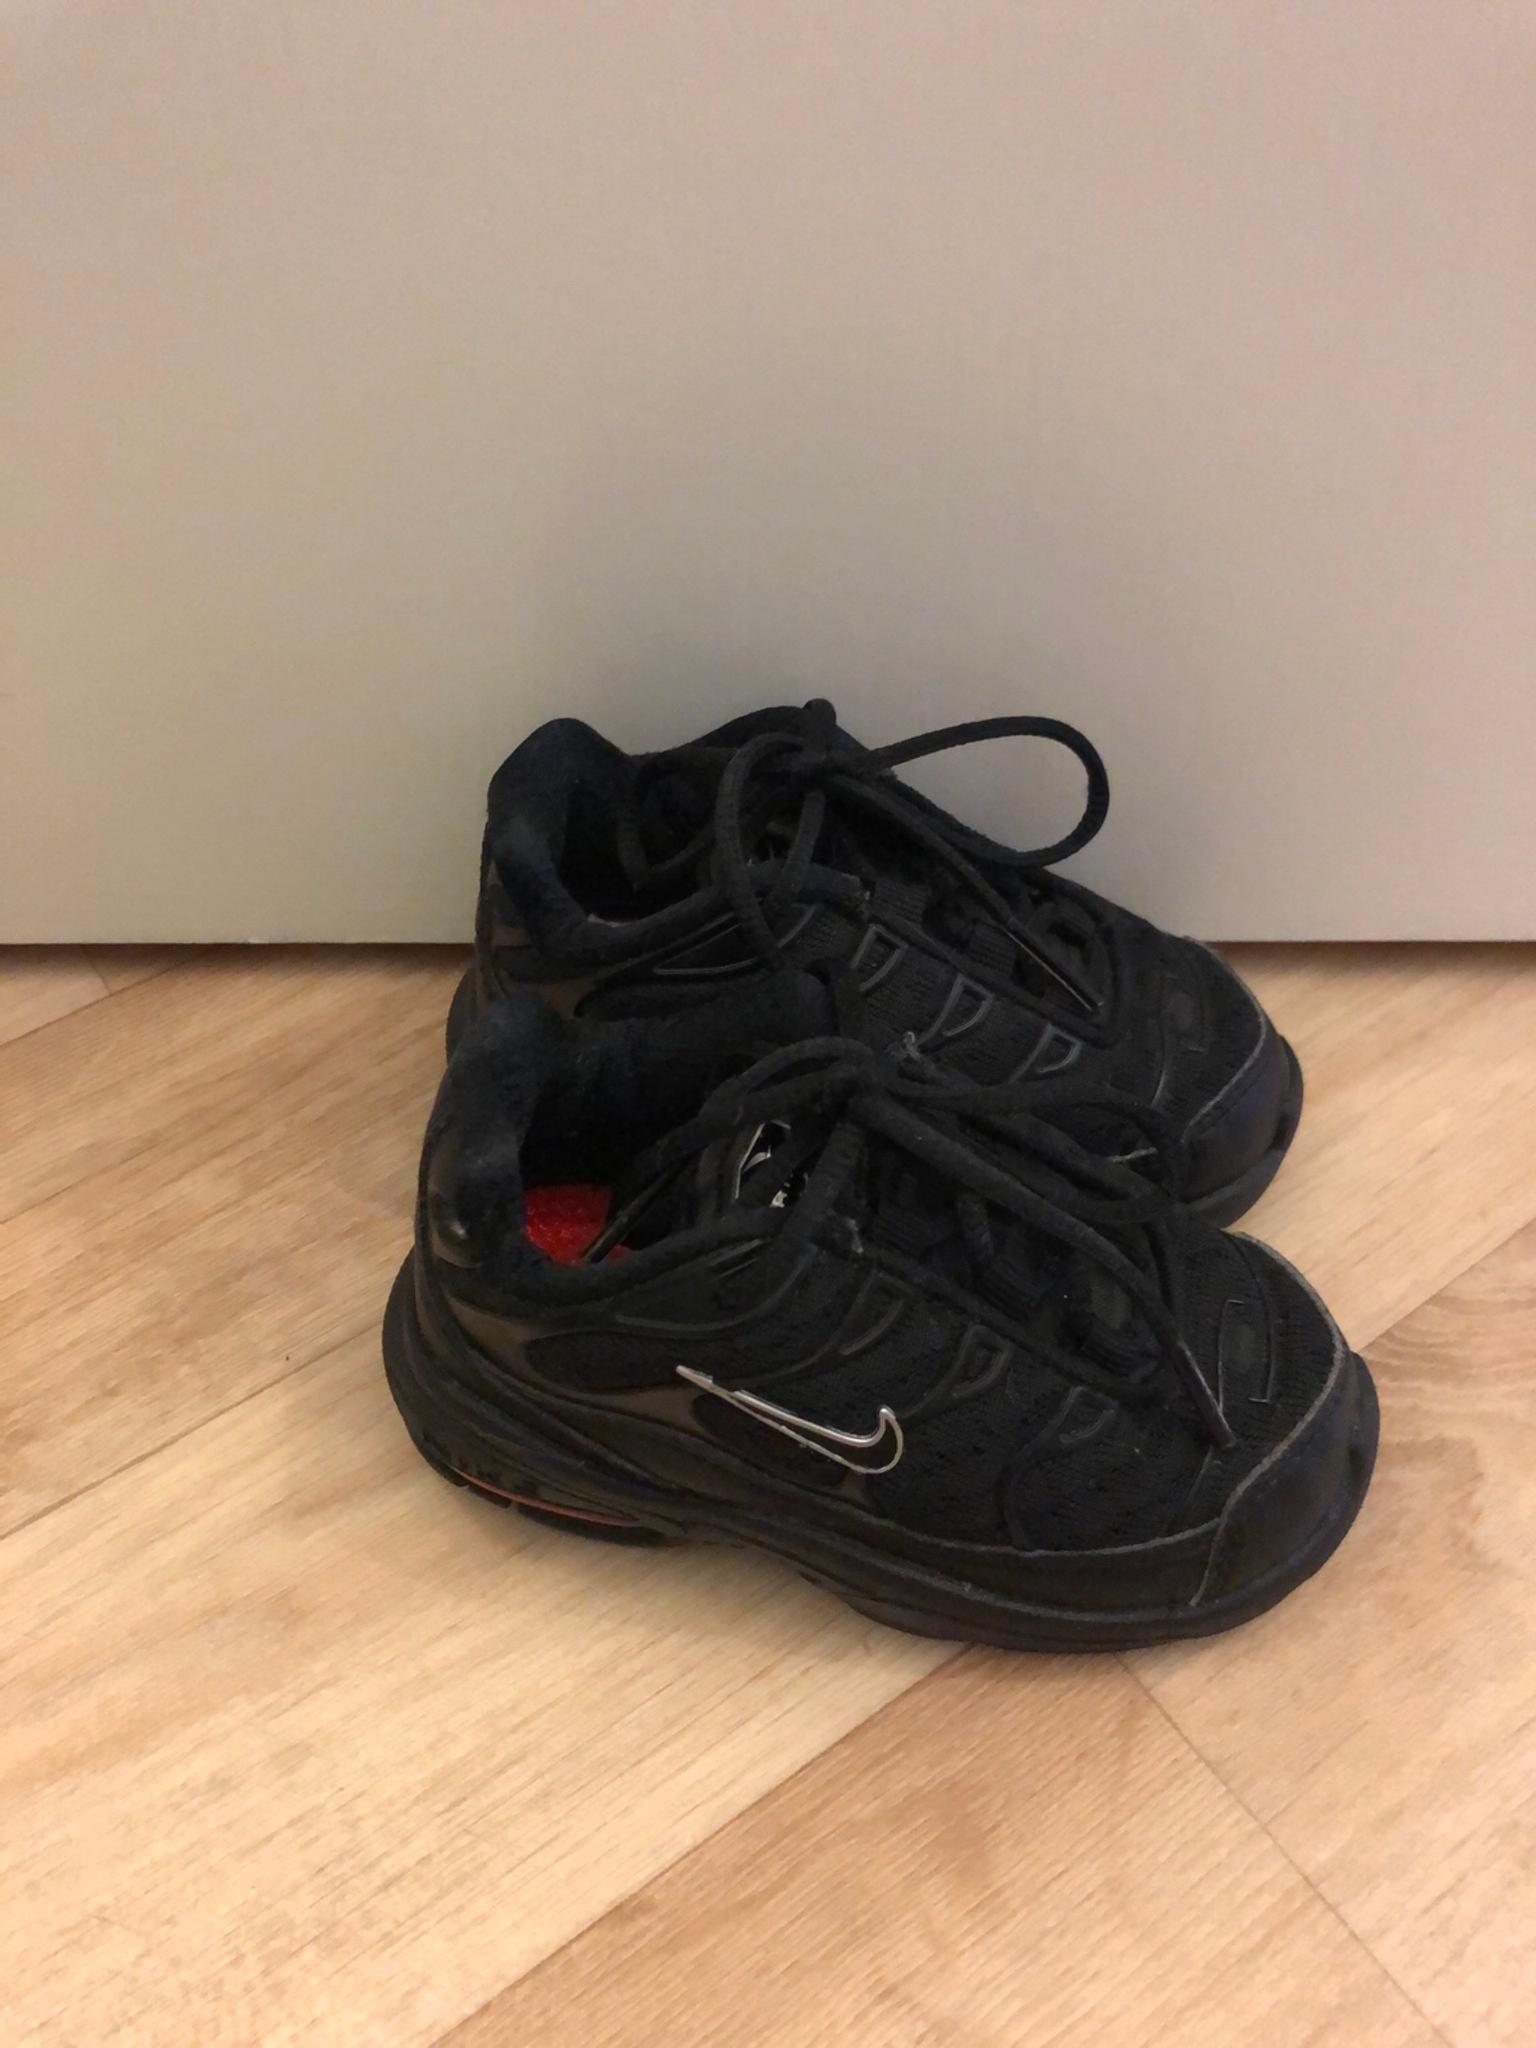 Baby Nike TN trainers size 4.5 in SE10 